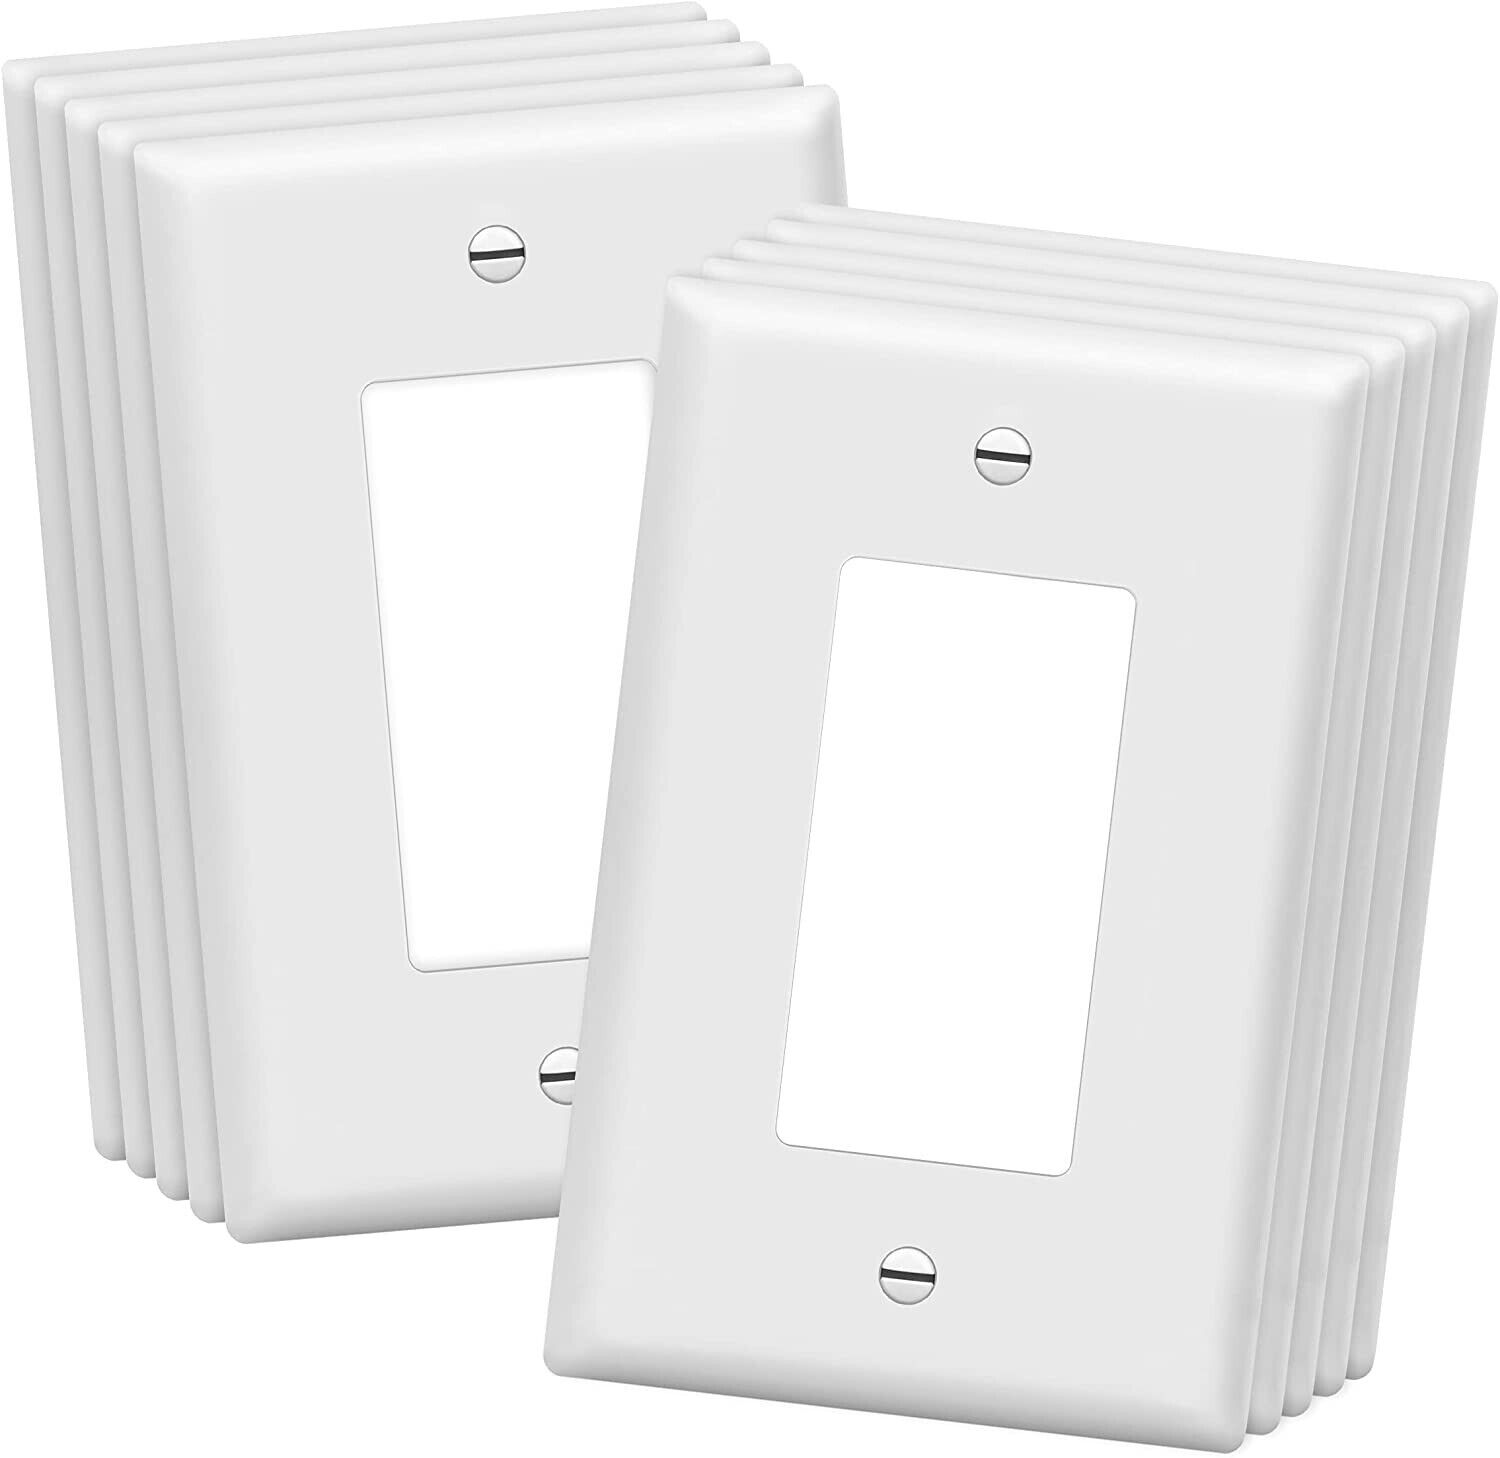 Leviton 80401-WMP 1-Gang GFCI Device Wallplate Standard Size Cover - Multipacks